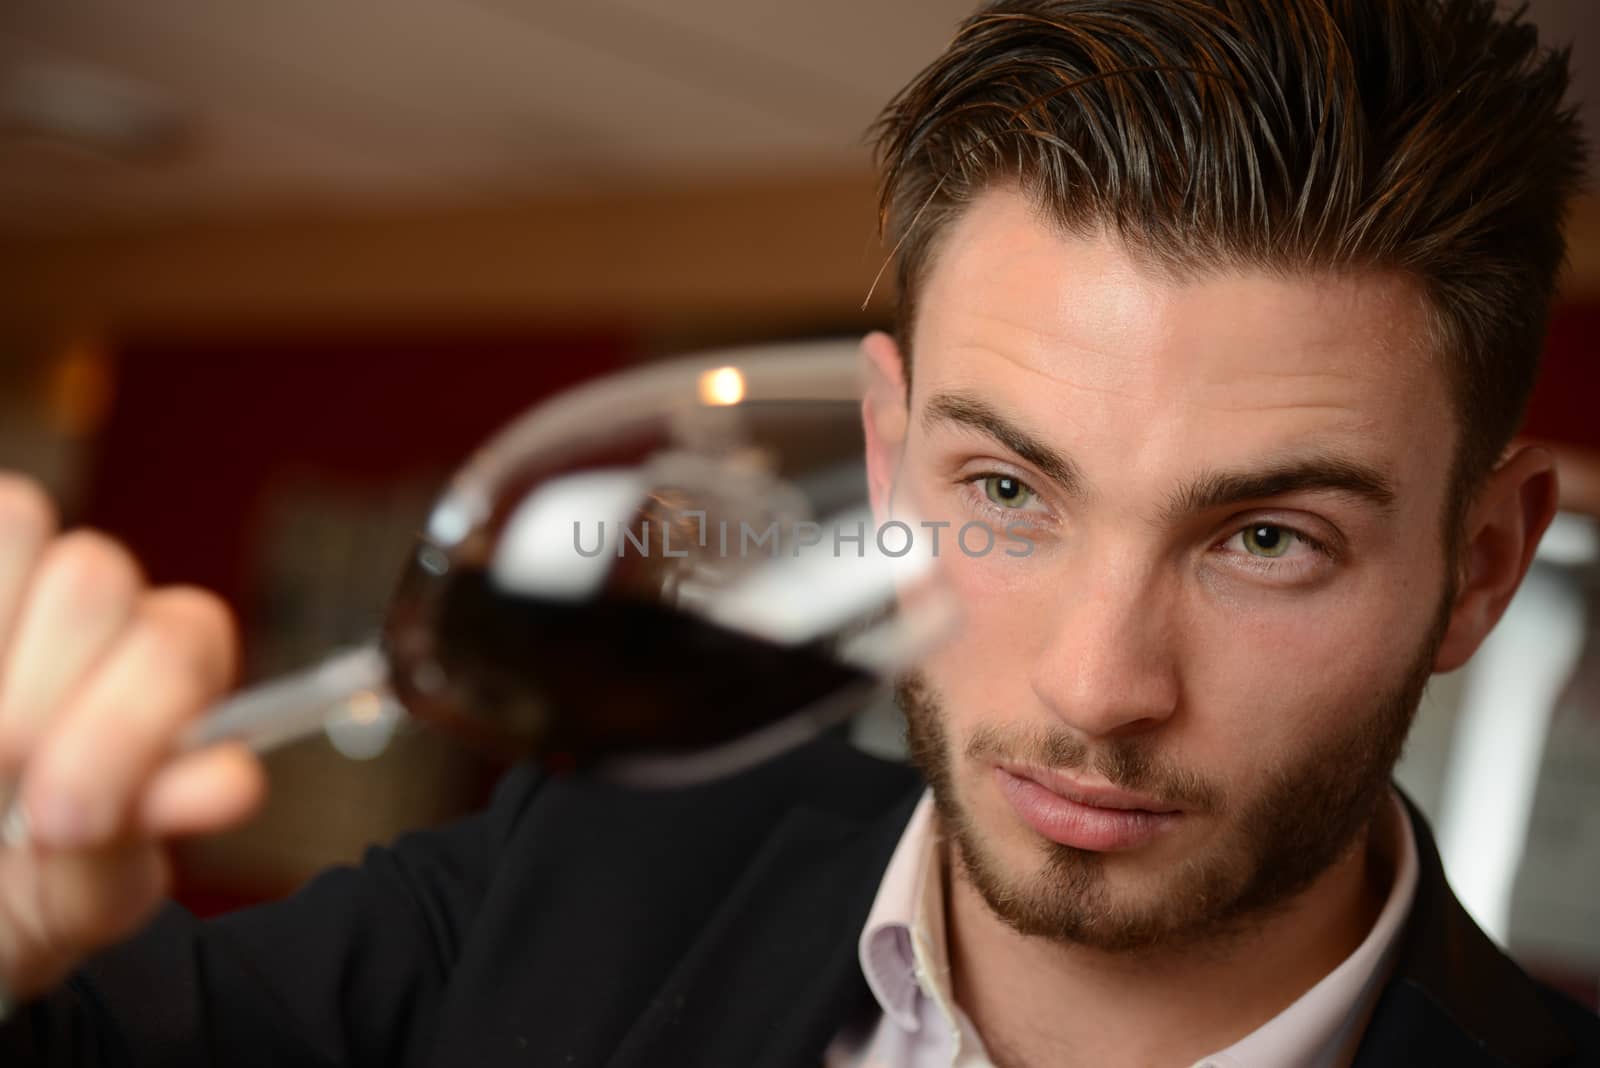 Young man with redwine glasses at celebration or party